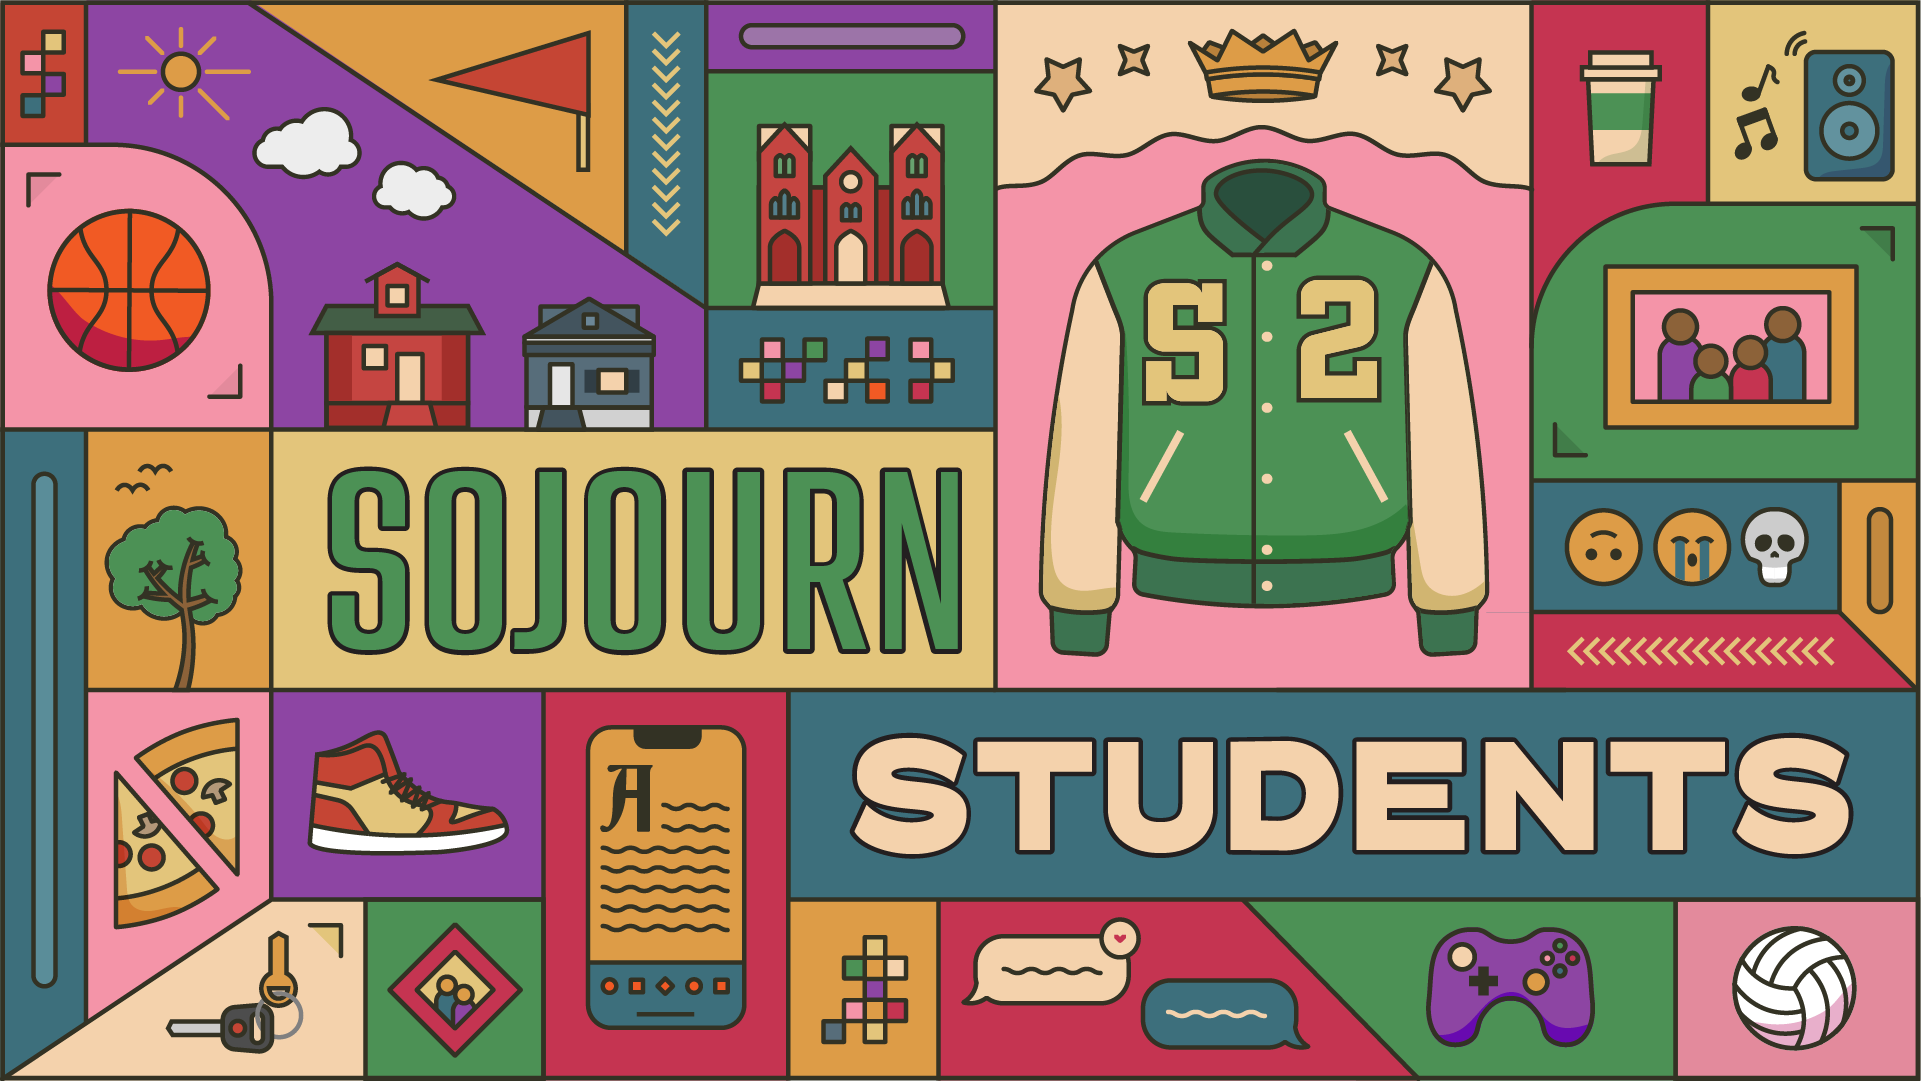 Sojourn Students